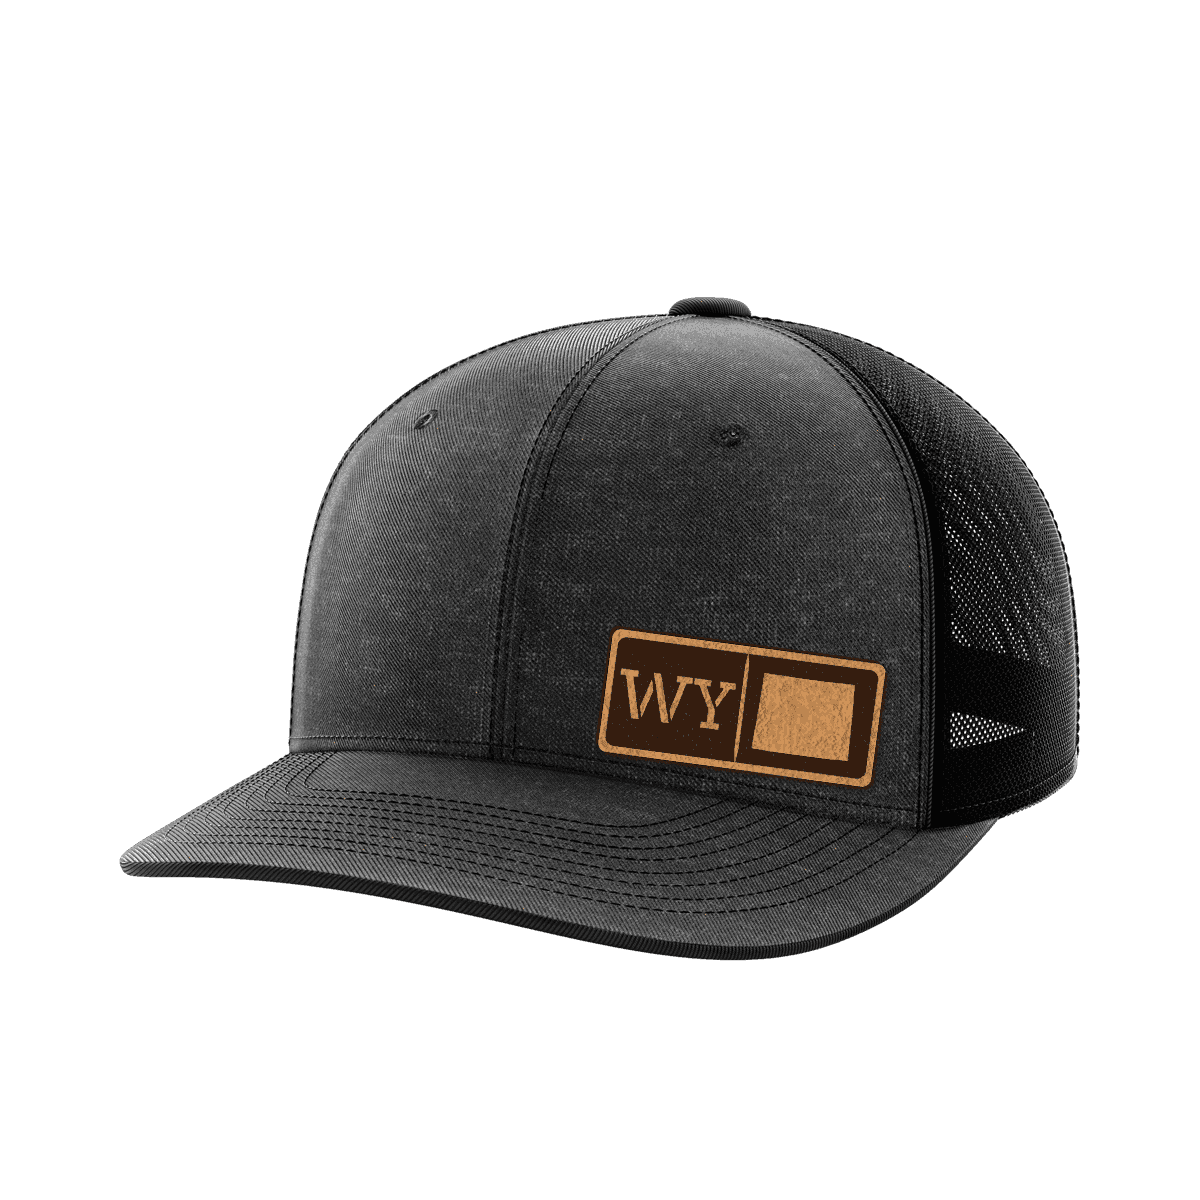 Wyoming Homegrown Hats - Greater Half